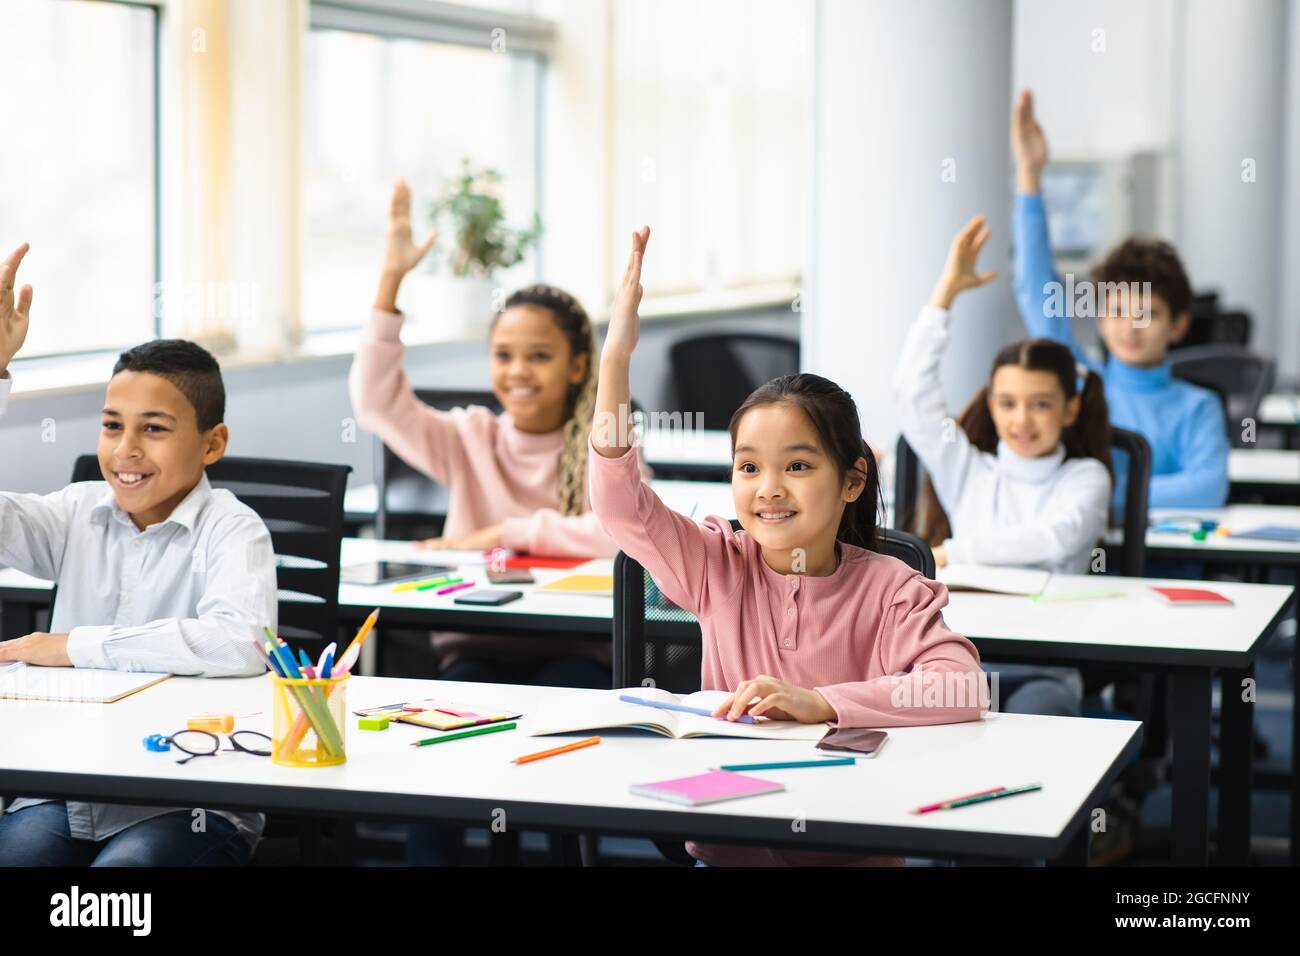 Return Back To School. Multiciltural diverse group of happy small elementary schoolchildren sitting at desks in classroom, raising hands up for an ans Stock Photo